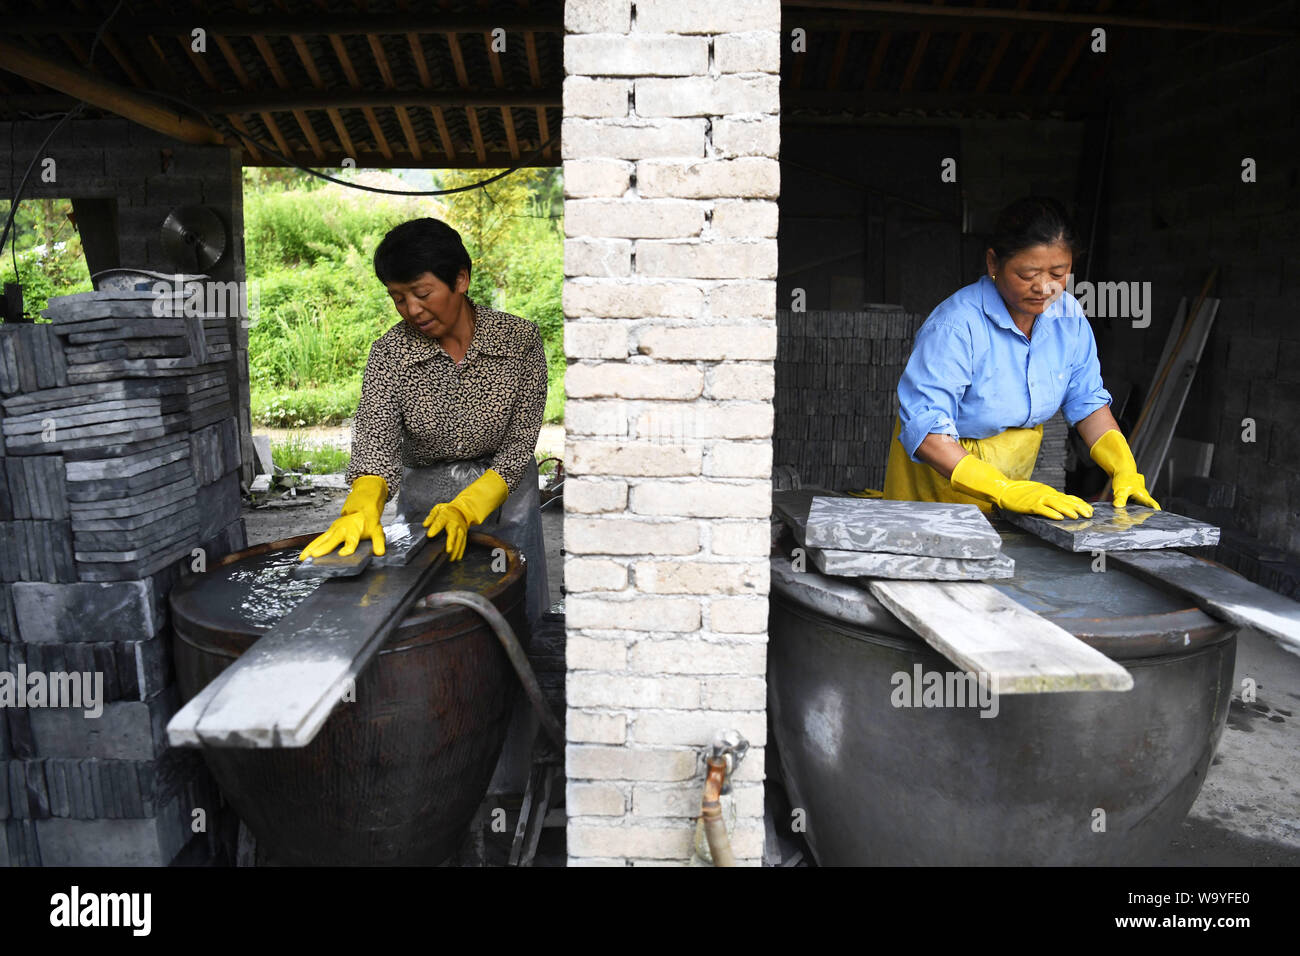 (190816) -- JINGXIAN, Aug. 16, 2019 (Xinhua) -- Workers polish bricks at a brick making factory in Maolin town of Jingxian county, east China's Anhui Province, Aug. 15, 2019. The brick with natural patterns, peculiar to the town of Maolin, is a kind of decorative material for ancient building, mainly used on door, wall and window. Fired with two different mud, the brick shows two different colors with delicate texture. During the Ming (1368-1644) and Qing (1644-1911) dynasties, such brick was widely used on local residential architectures. However, the brick making techniques were once almo Stock Photo